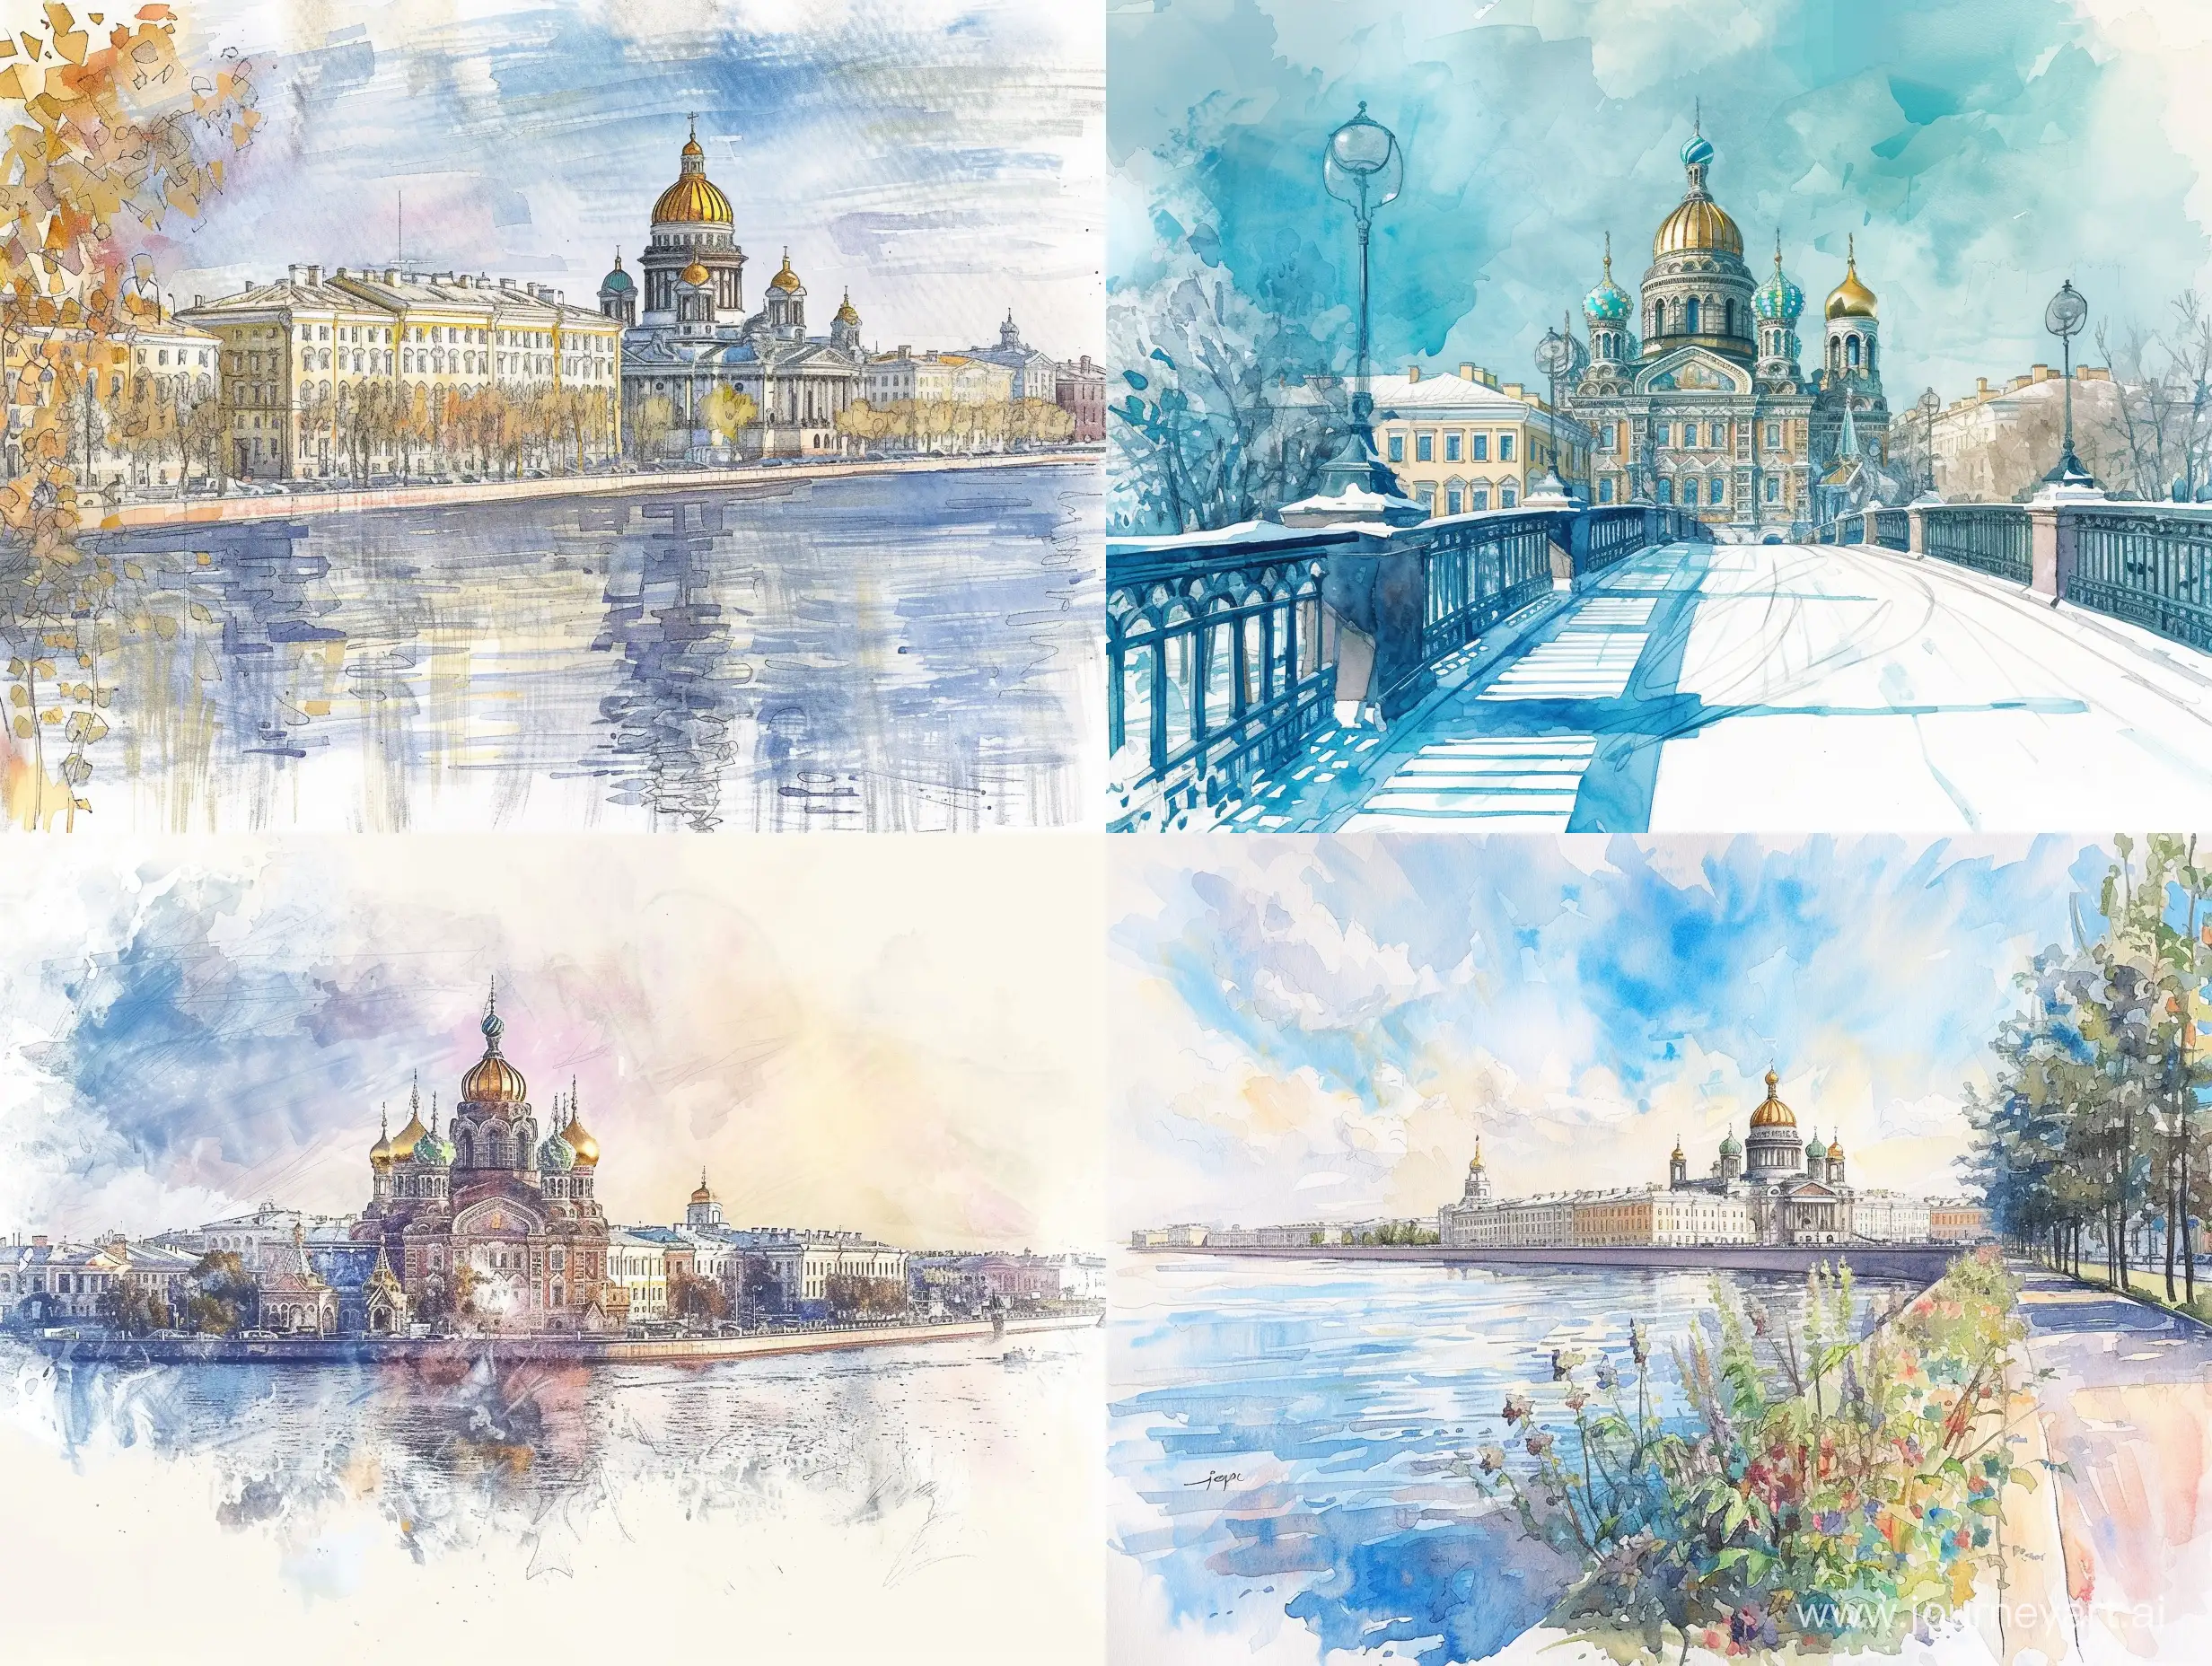 Scenic-Watercolor-Illustration-of-St-Petersburg-with-Intricate-Details